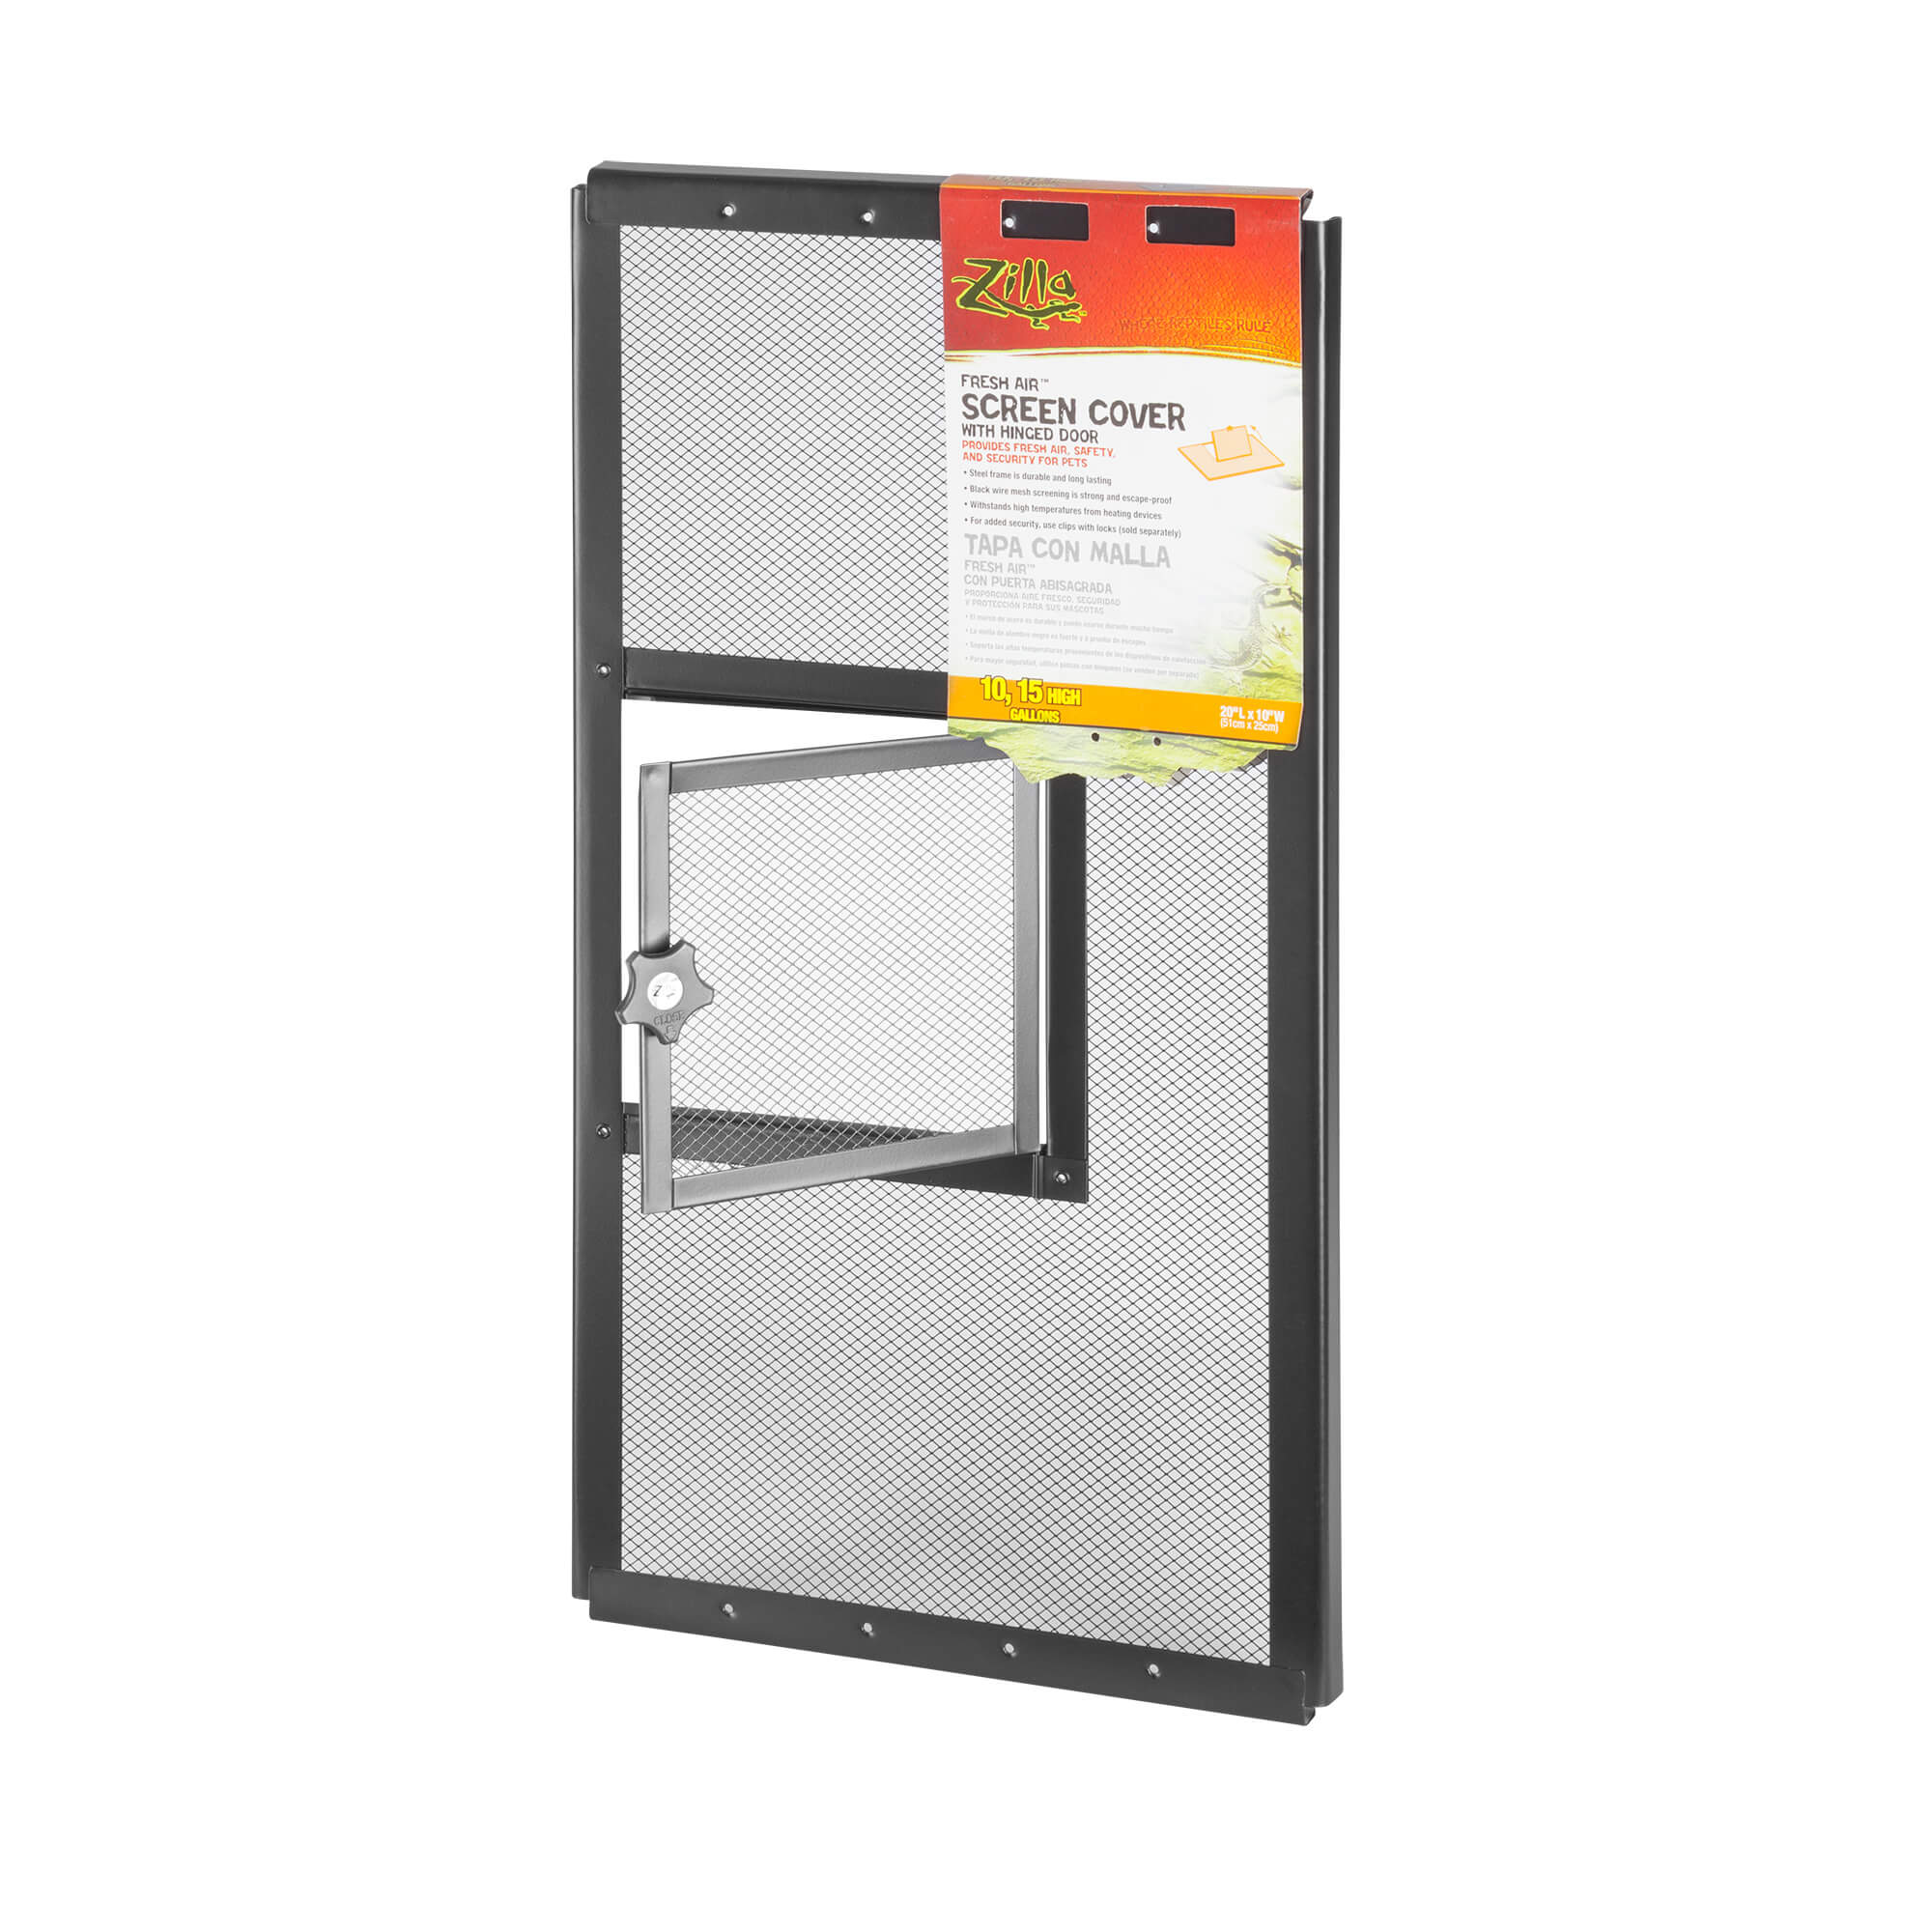 Zilla Fresh Air Screen Cover with Access